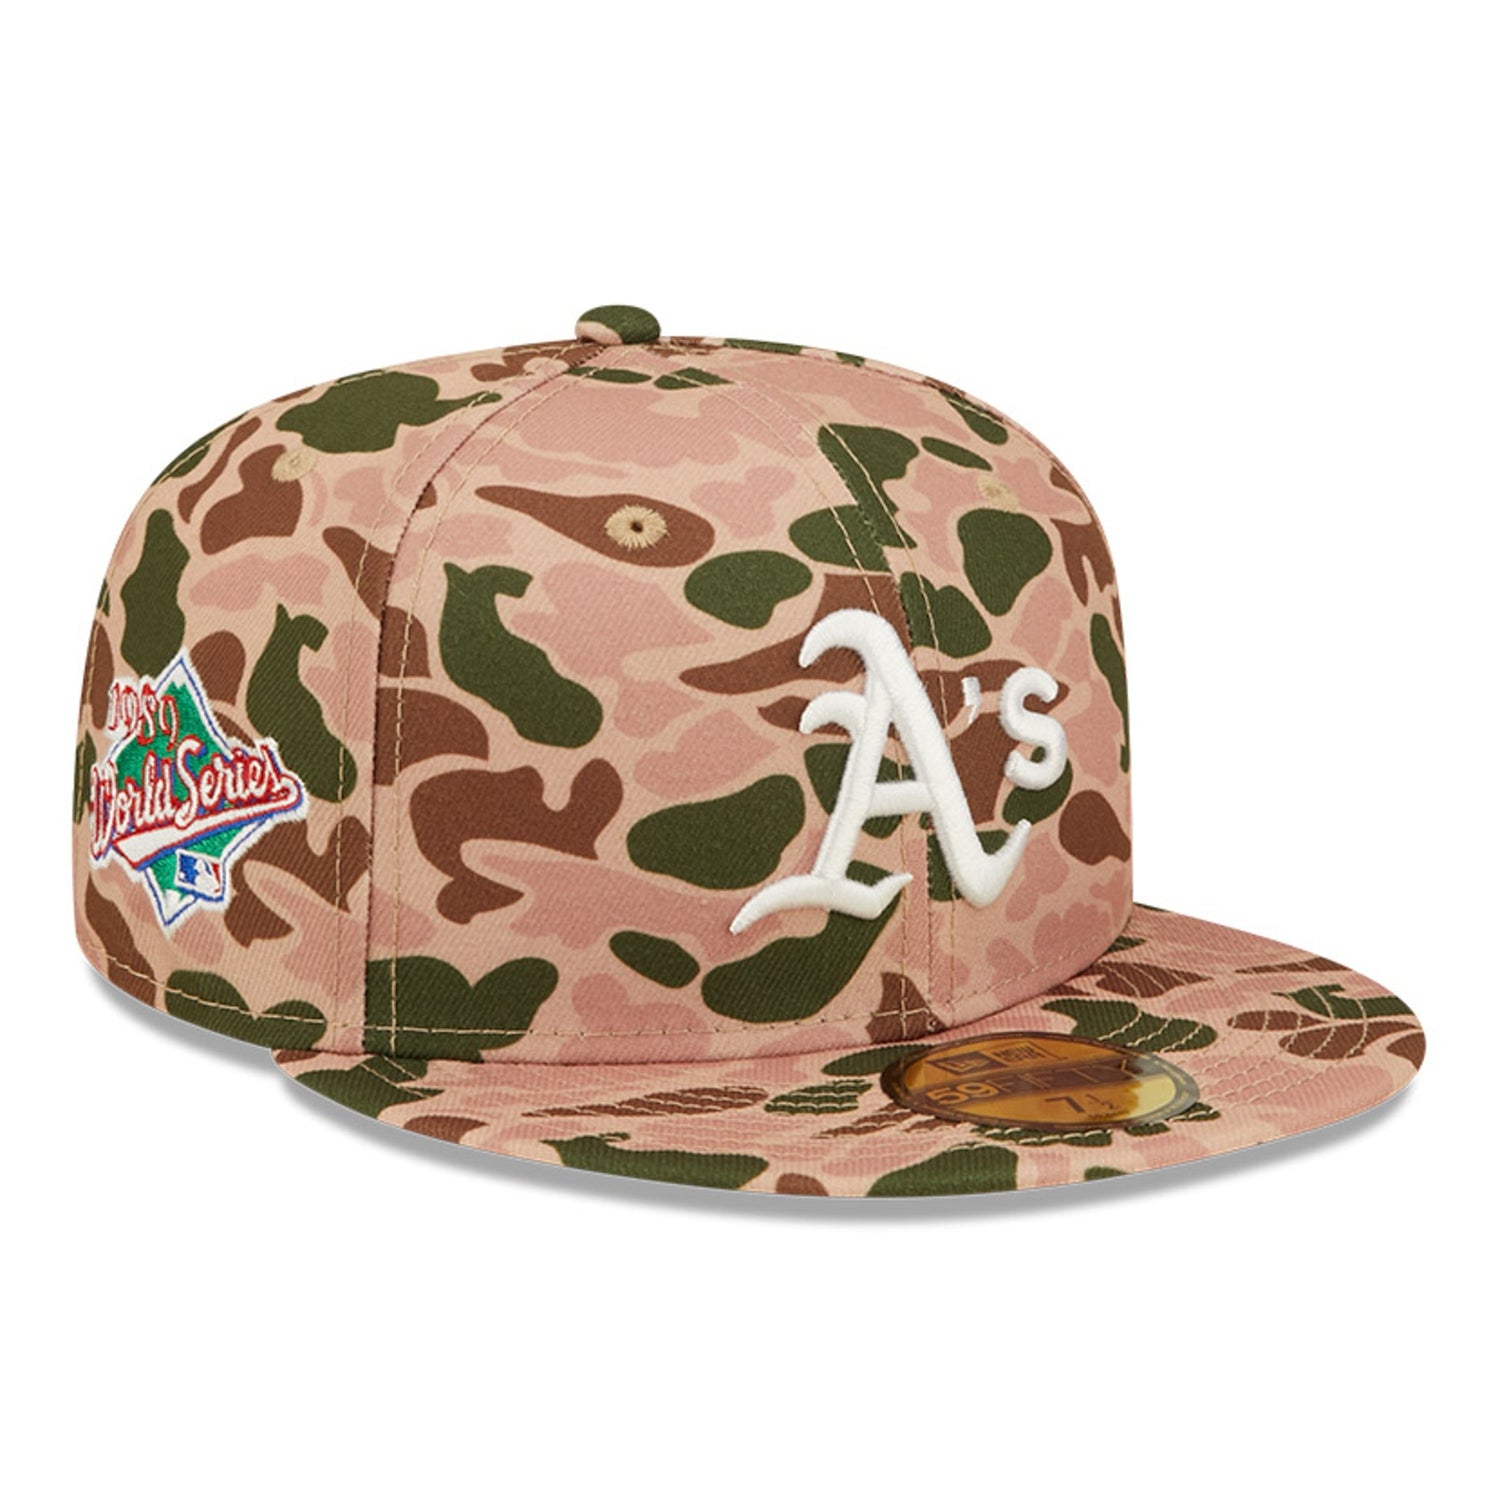 Atlanta Braves Camouflage Fitted Hat Size 7 - New Era 59Fifty Military Camo  Hat